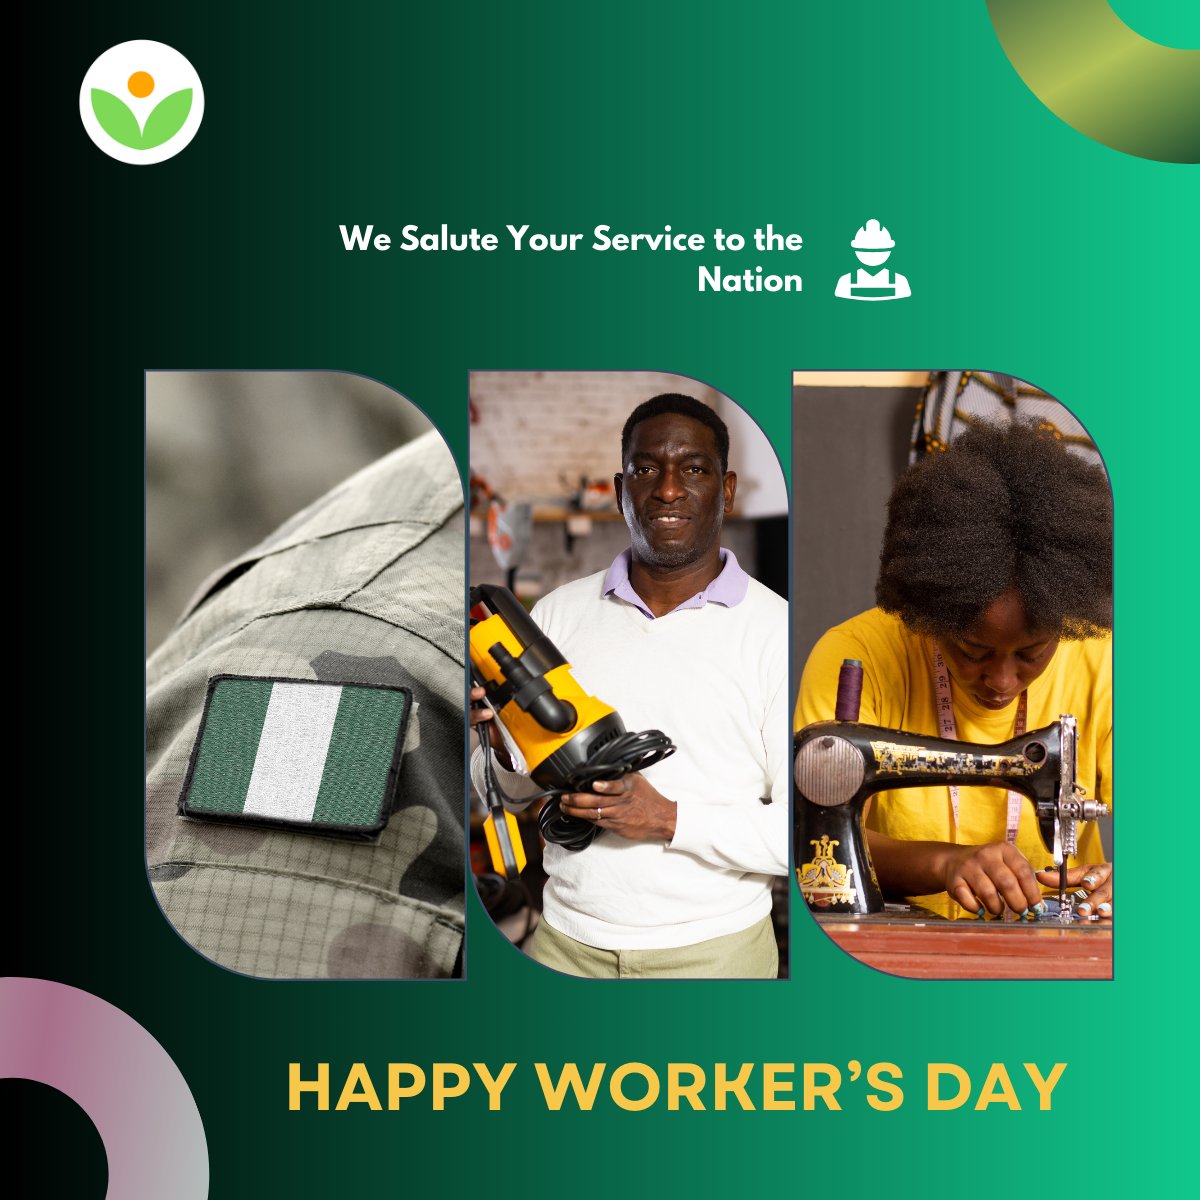 🎉 Happy Worker's Day, Finsense Co-op! 🎉 

Your dedication drives our mission forward, empowering communities across Nigeria. 

Here's to teamwork and prosperity! 

#FinsenseCoop #finsense #WorkerDay #Nigeria 🌟🇳🇬✨